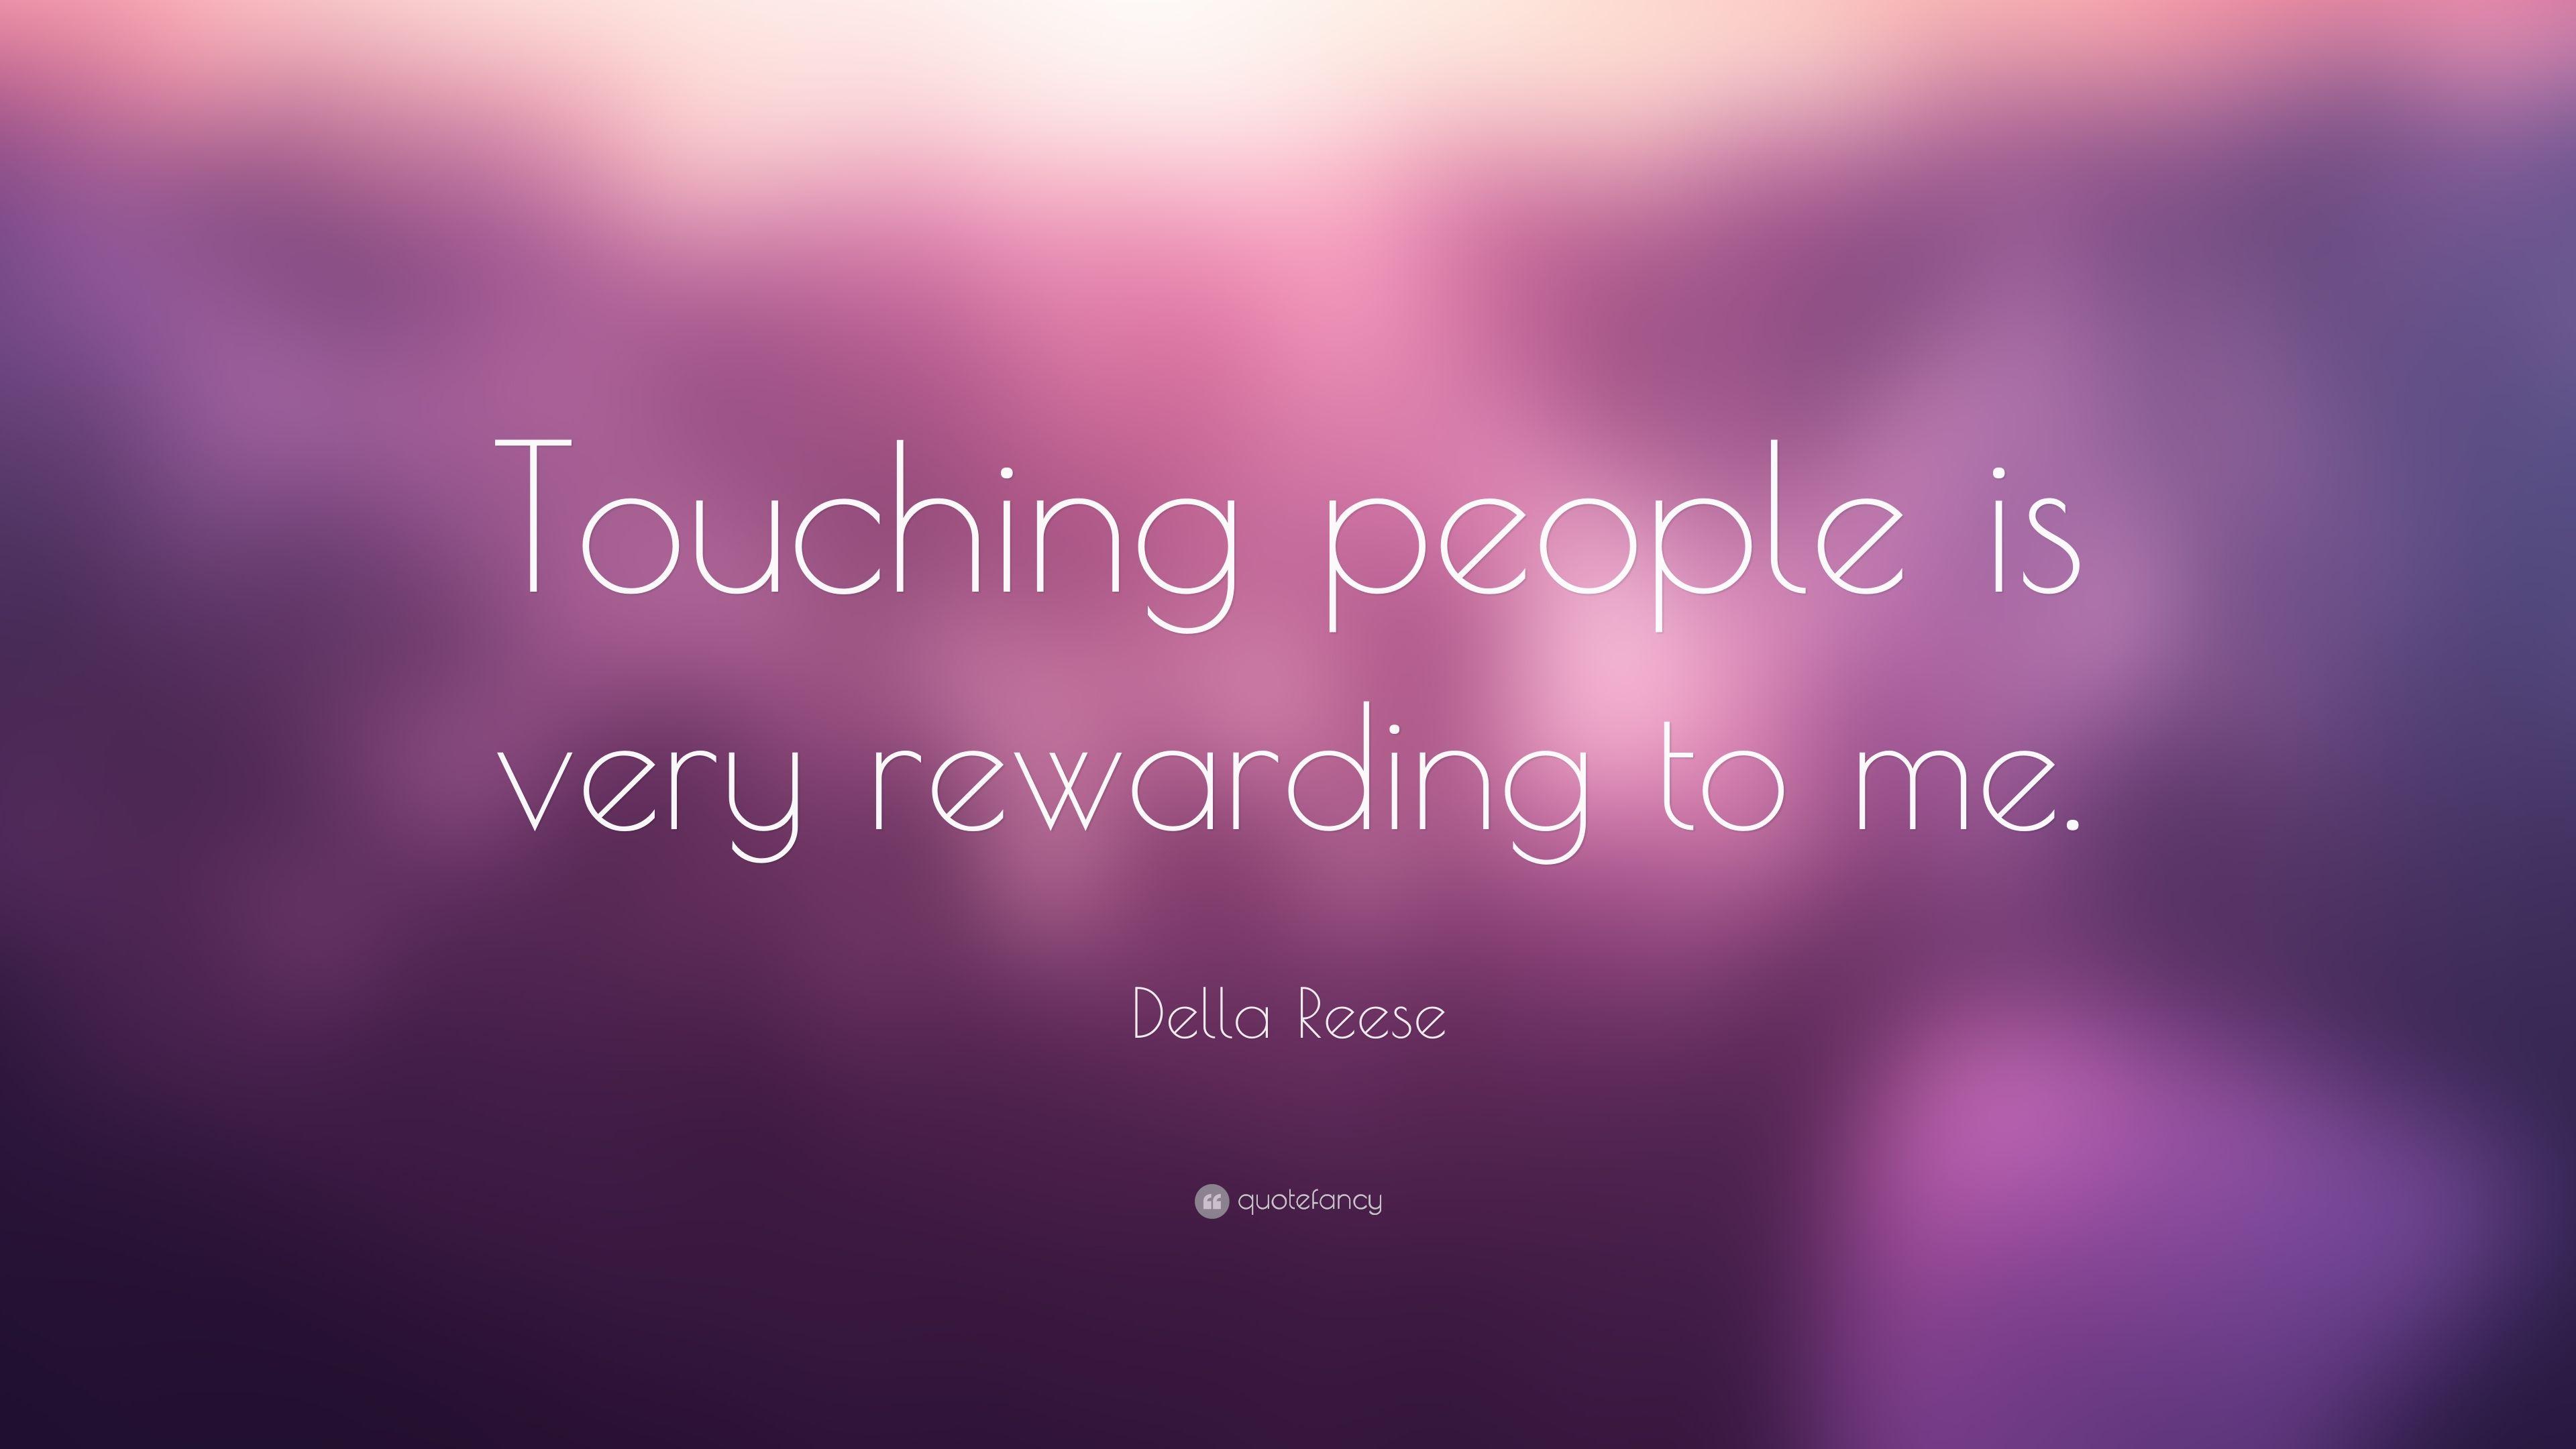 Della Reese Quote: “Touching people is very rewarding to me.” 5